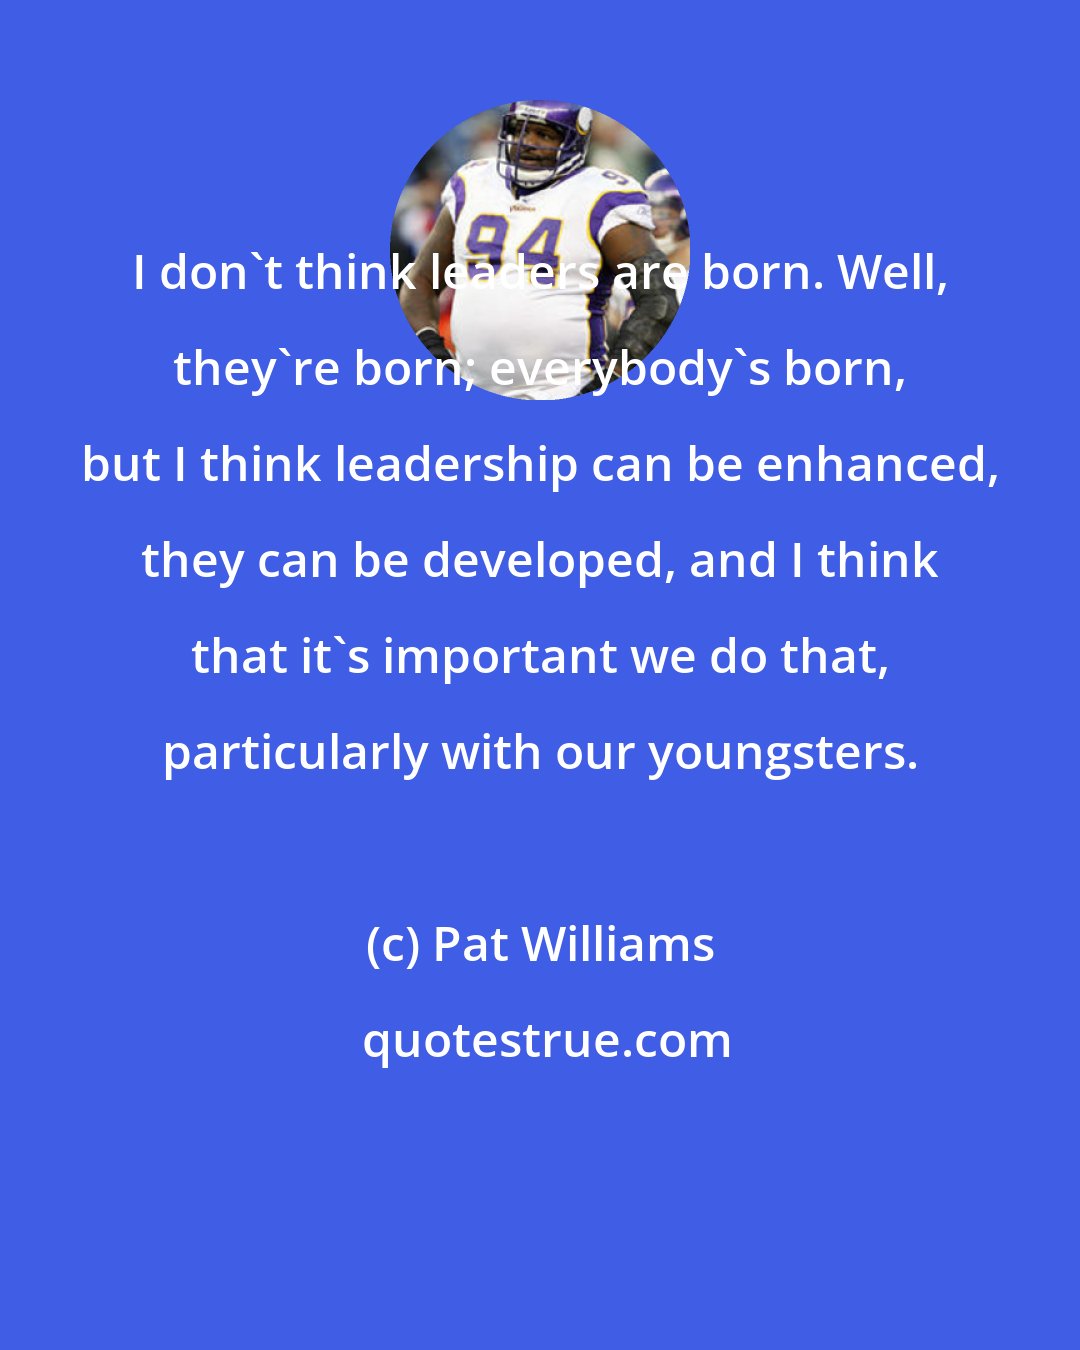 Pat Williams: I don't think leaders are born. Well, they're born; everybody's born, but I think leadership can be enhanced, they can be developed, and I think that it's important we do that, particularly with our youngsters.